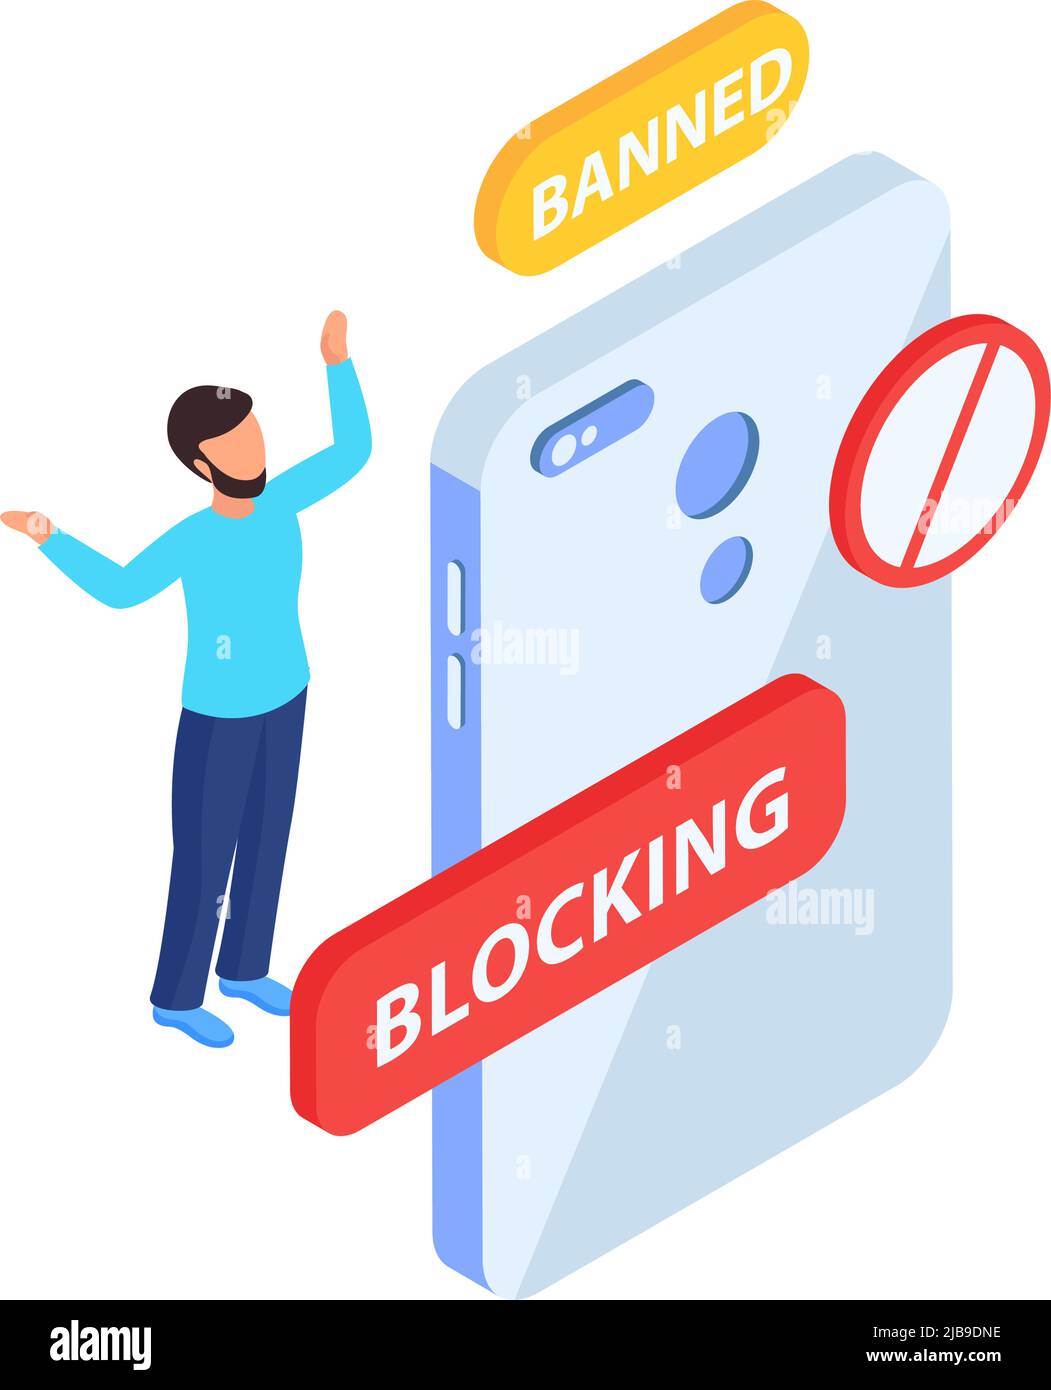 Blocking internet banned user isometric icon with human character and smartphone 3d vector illustration Stock Vector